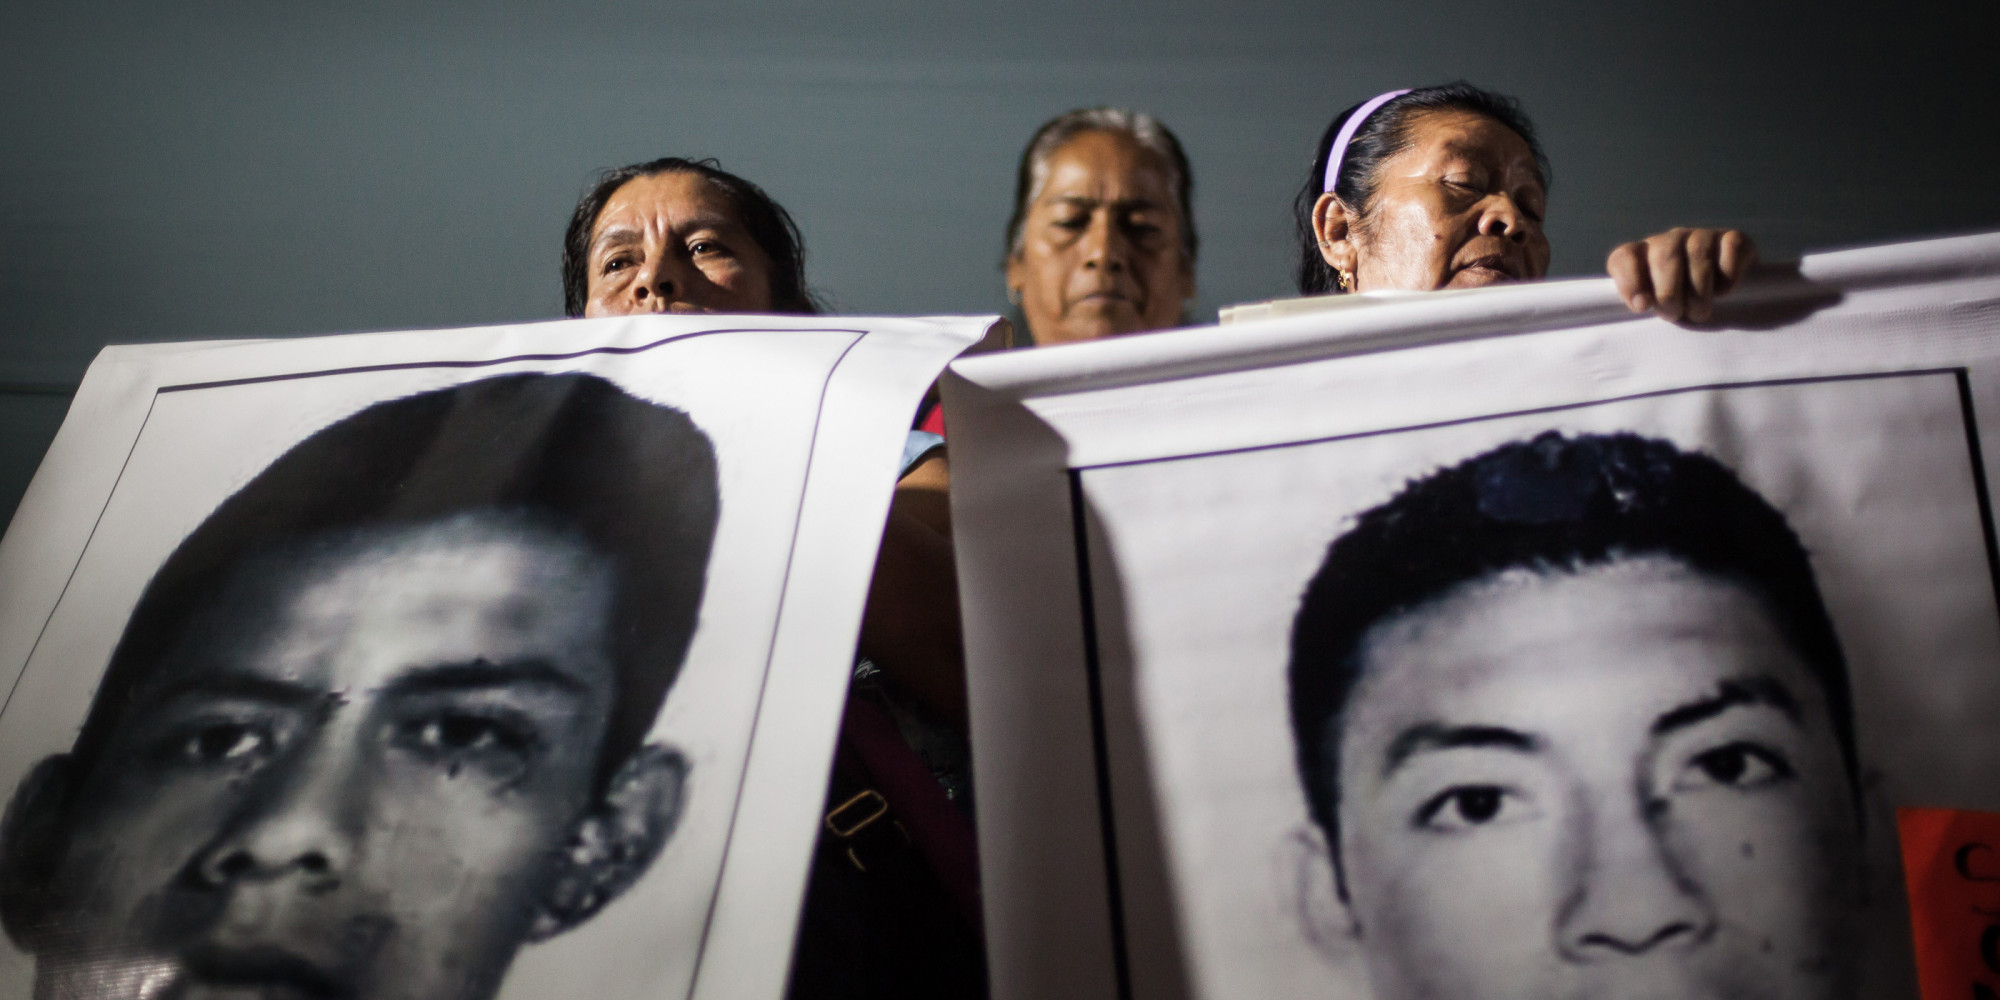 Mexico: Gang Members Confess To Mass Killing In Missing Students Probe